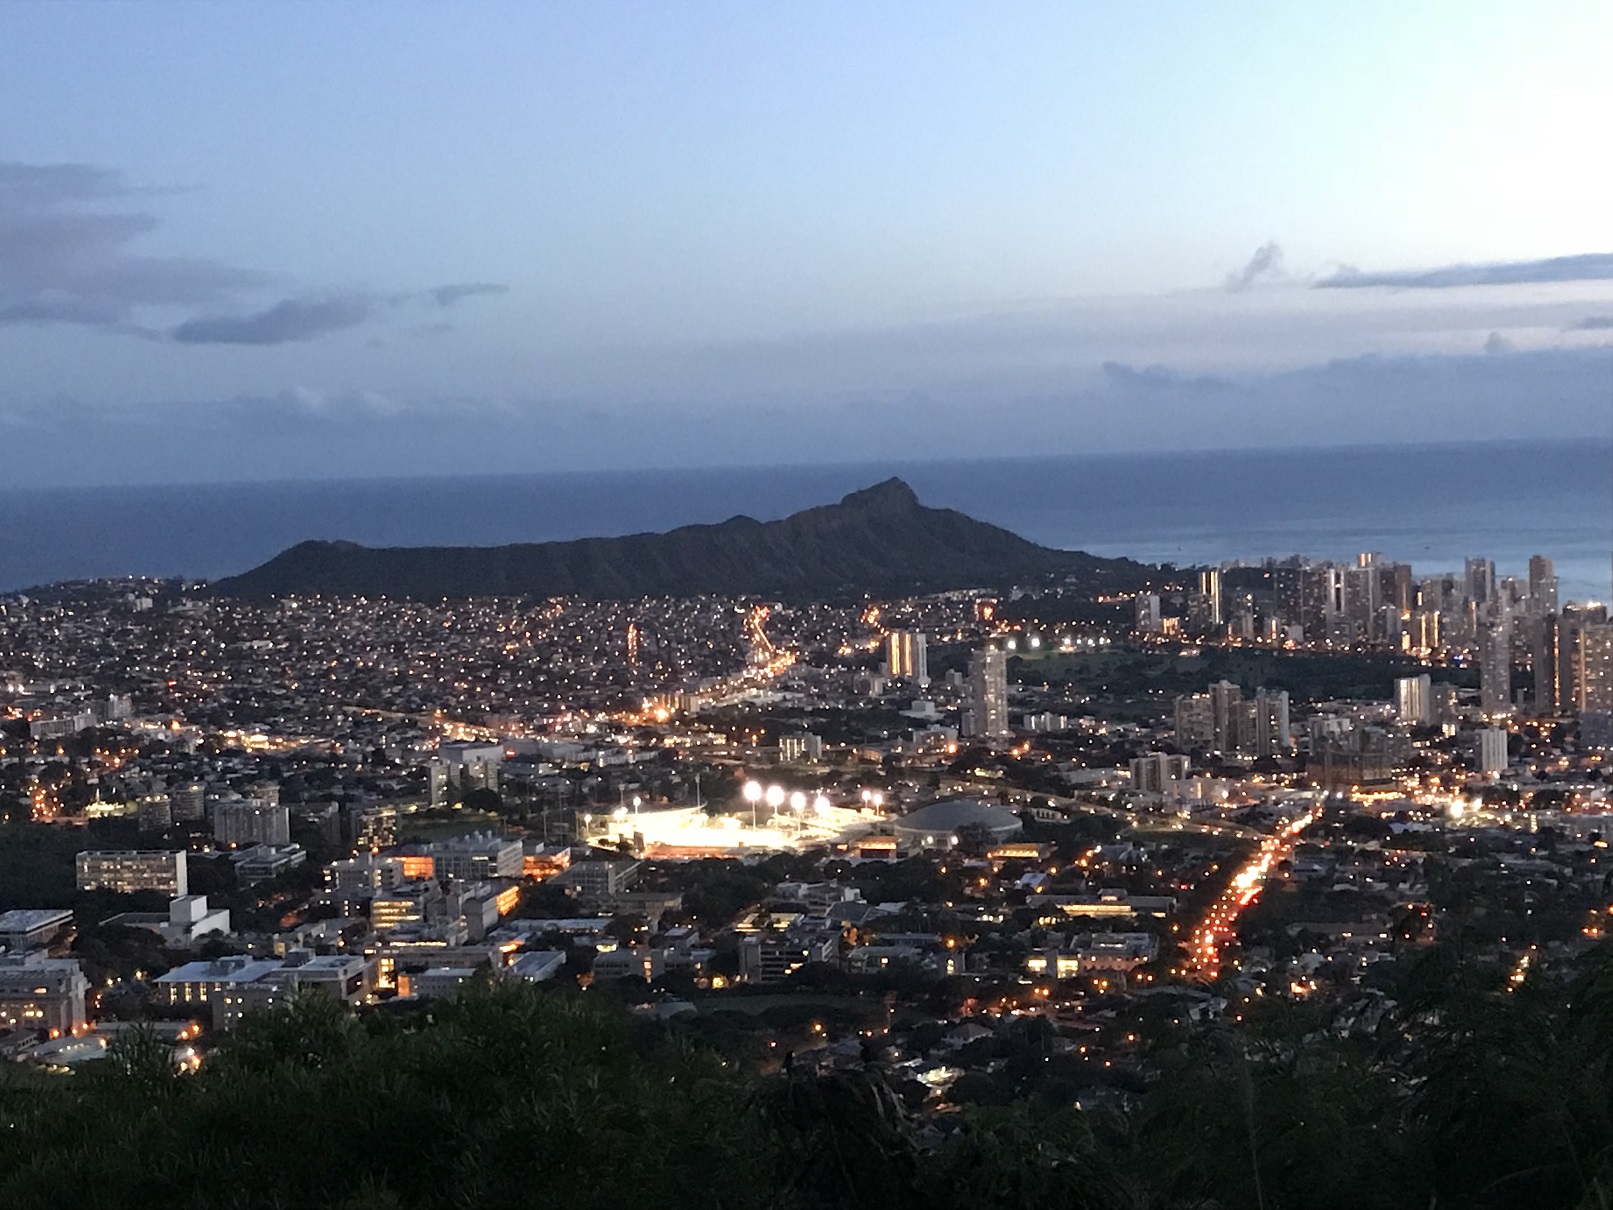 view from tantalus night.jpg